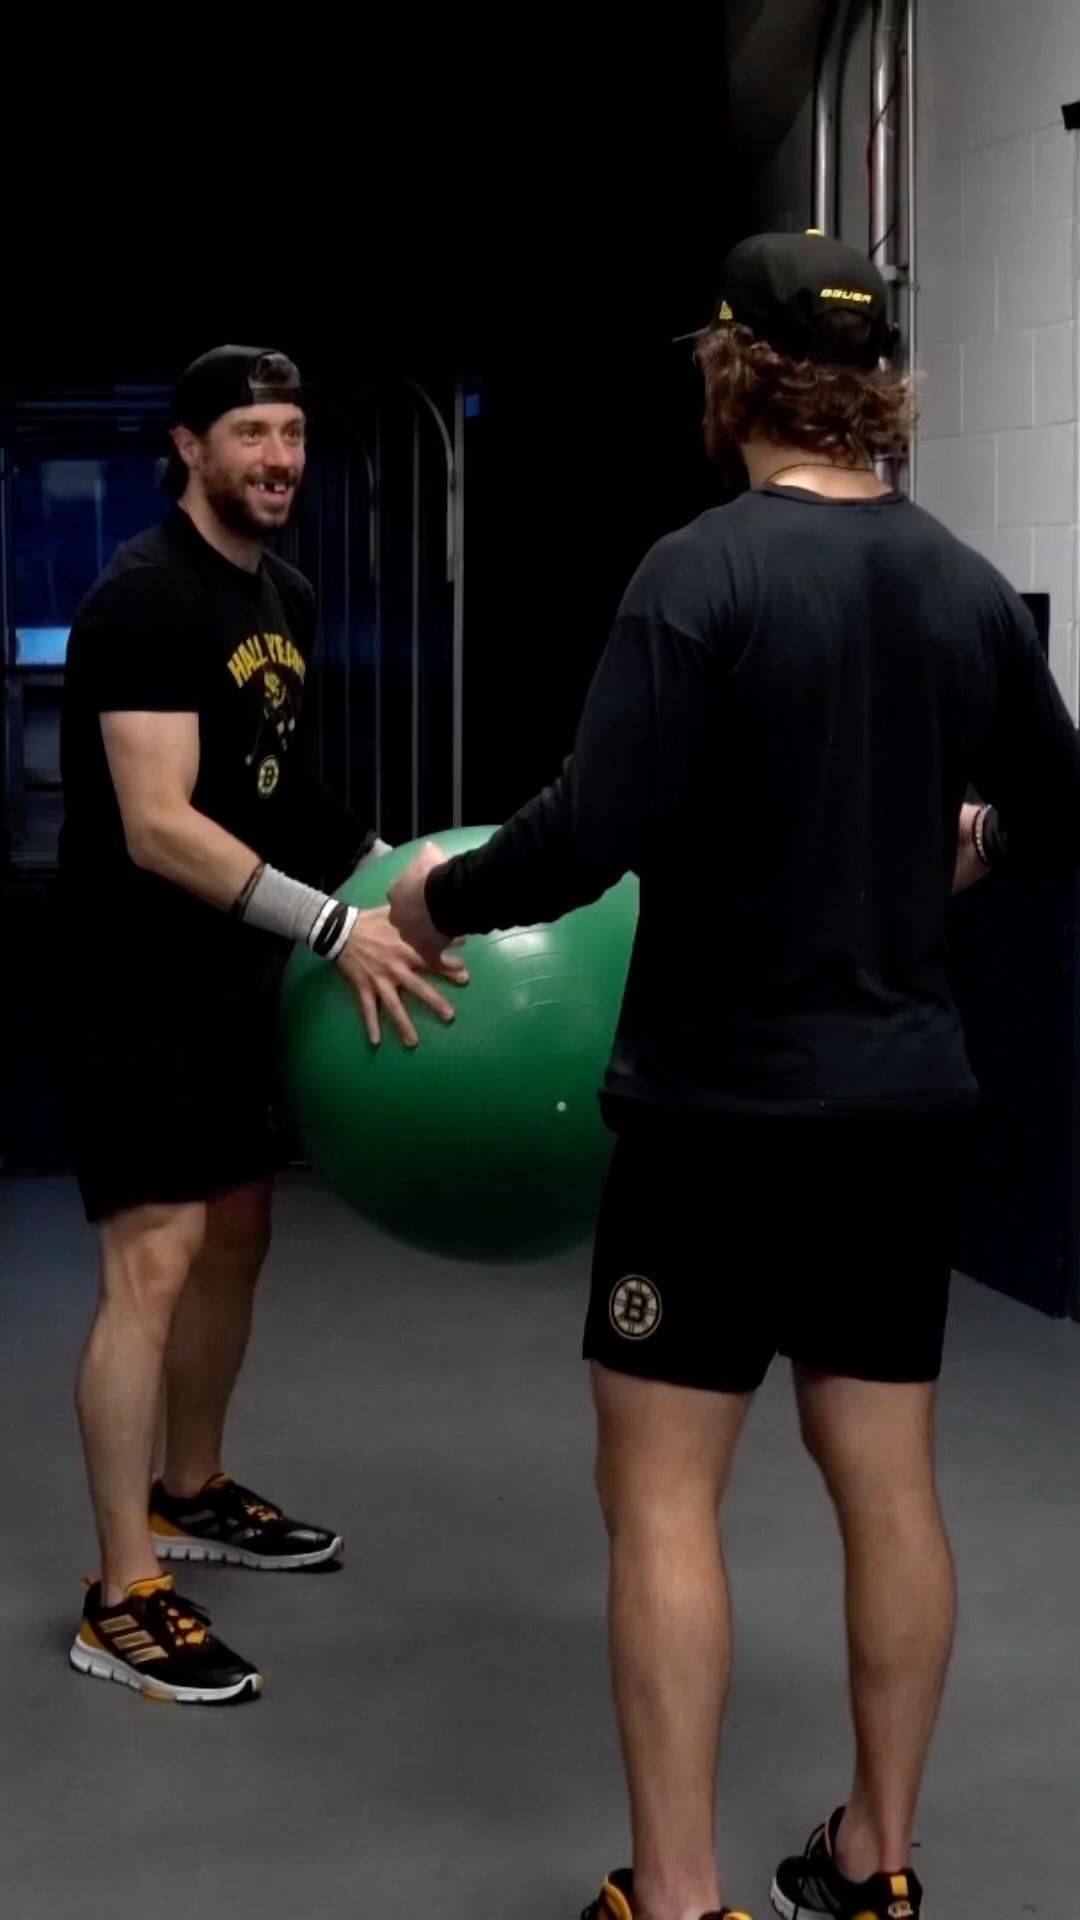 You never know what these two will be up to pregame.  Watch #BehindTheB at Bos...